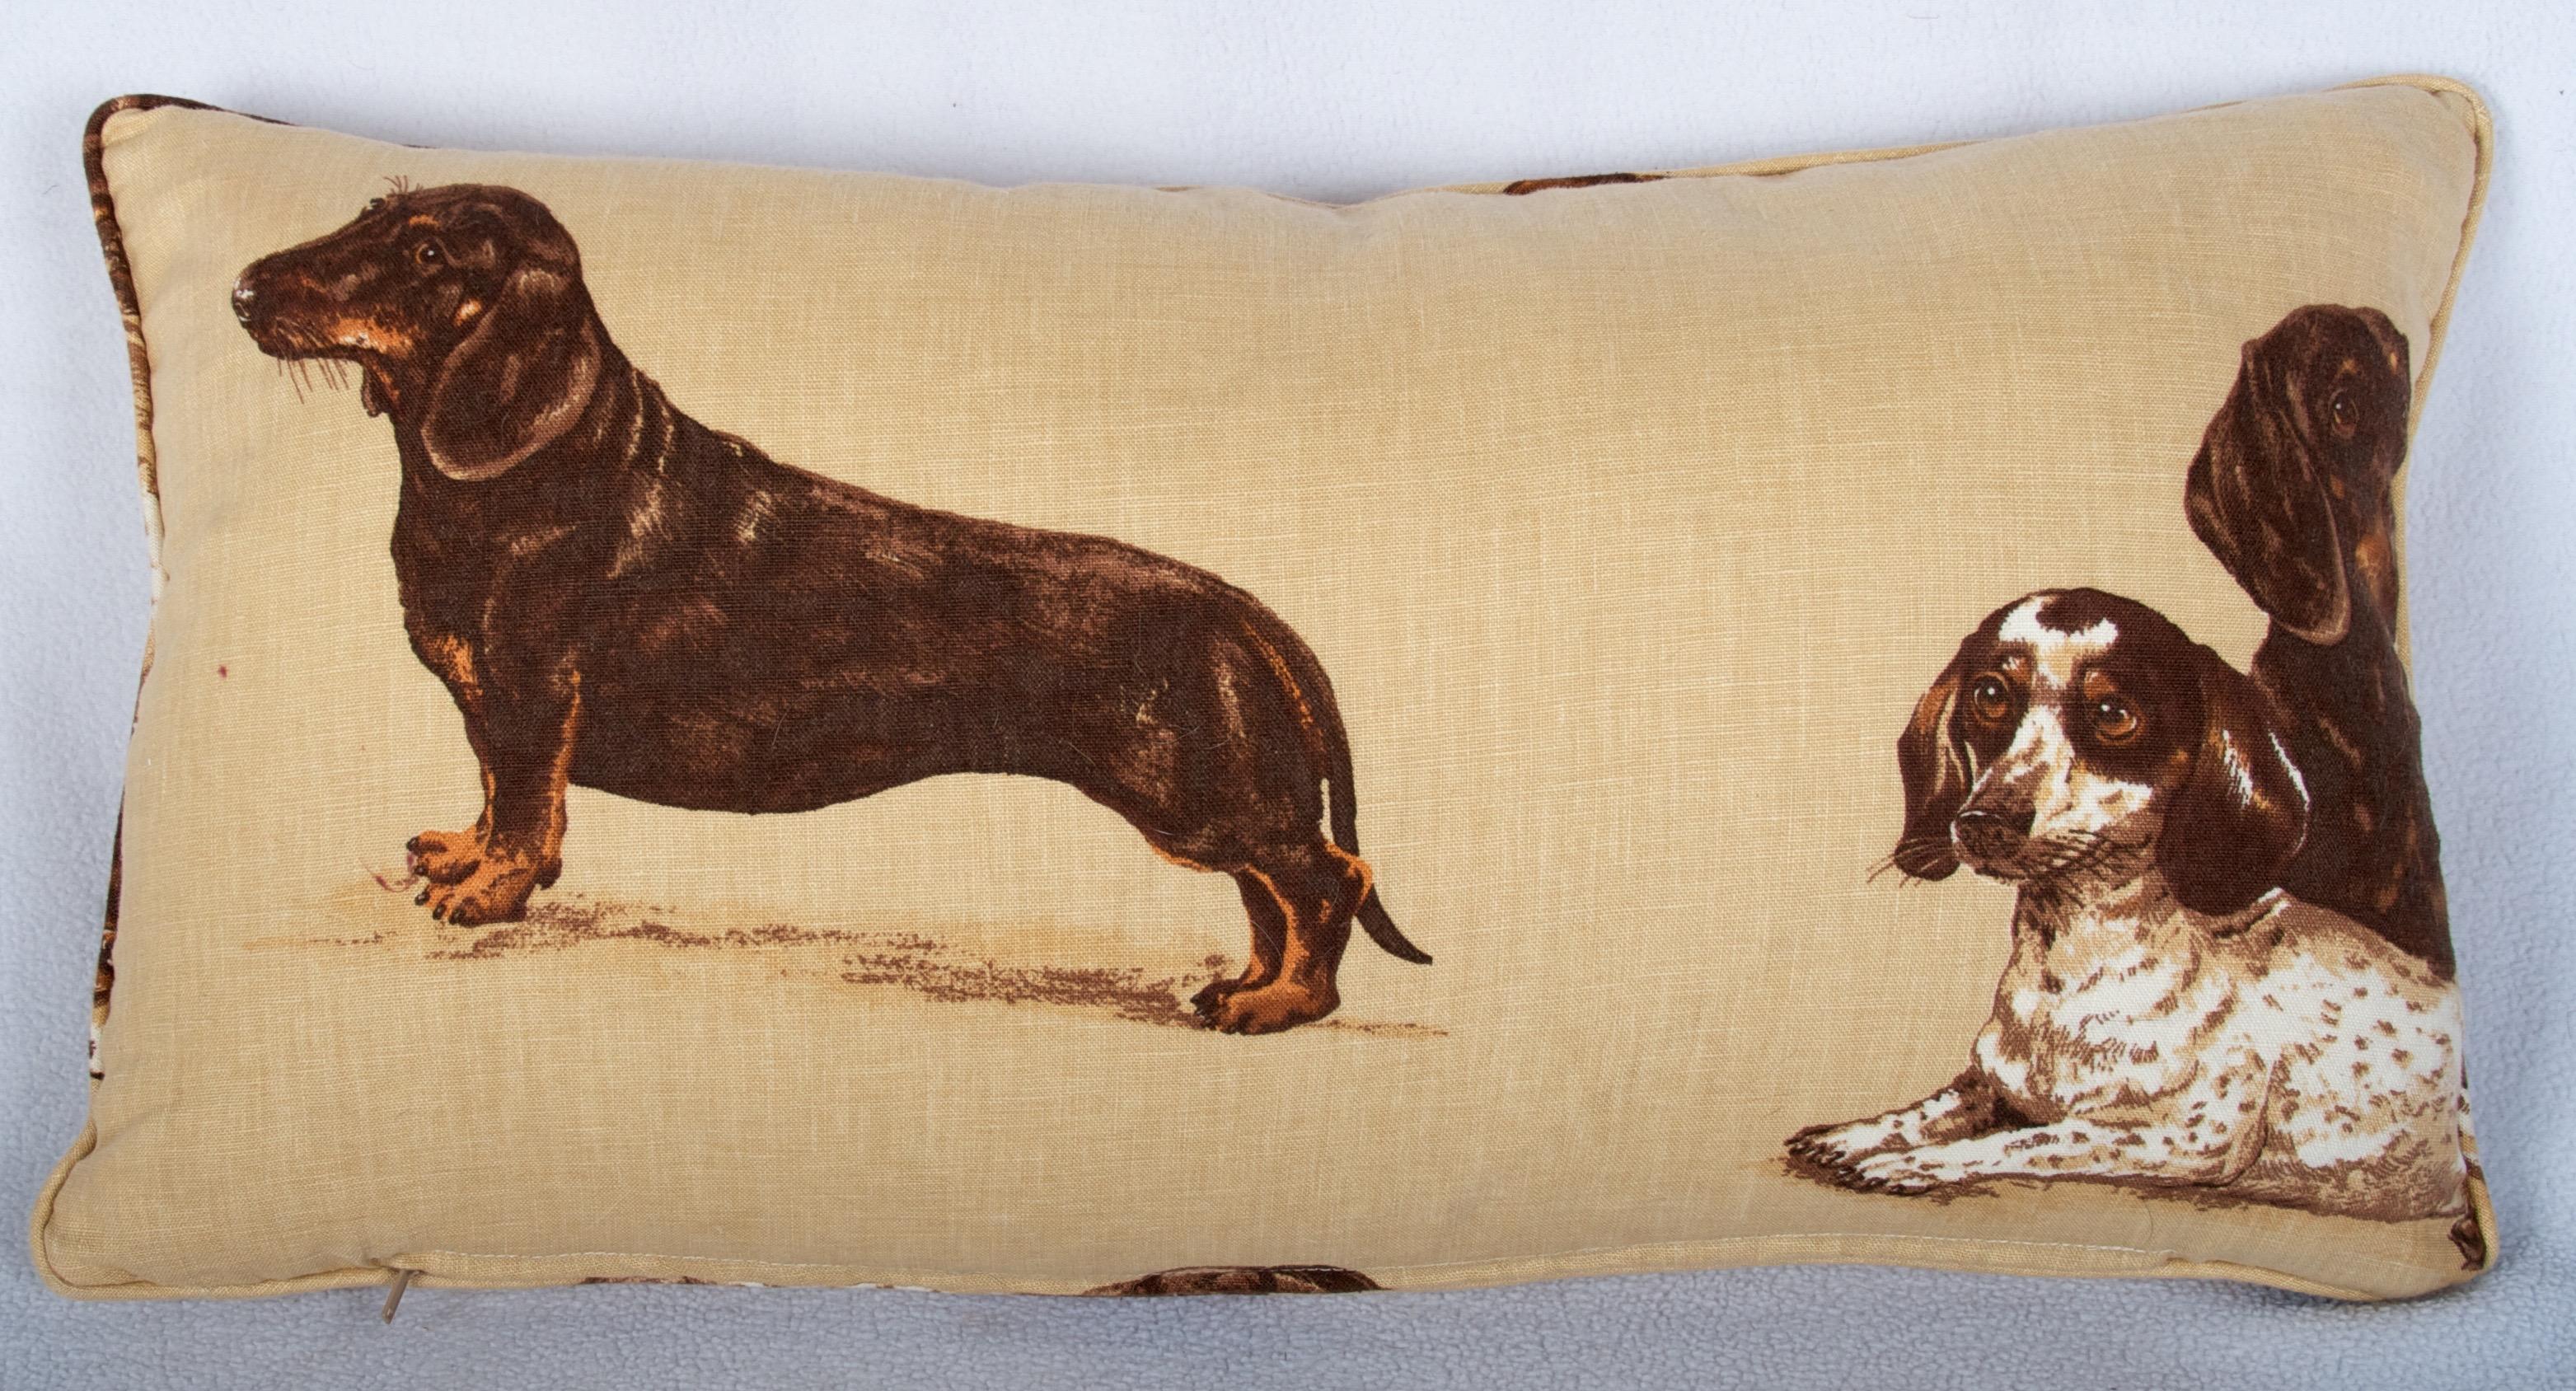 A wonderful pillow fabricated with images of printed linen
depicting beautiful dachshund hounds.
Several more can be ordered, with different images.
The third image shows the reverse side, showing the hounds in
a different configuration.